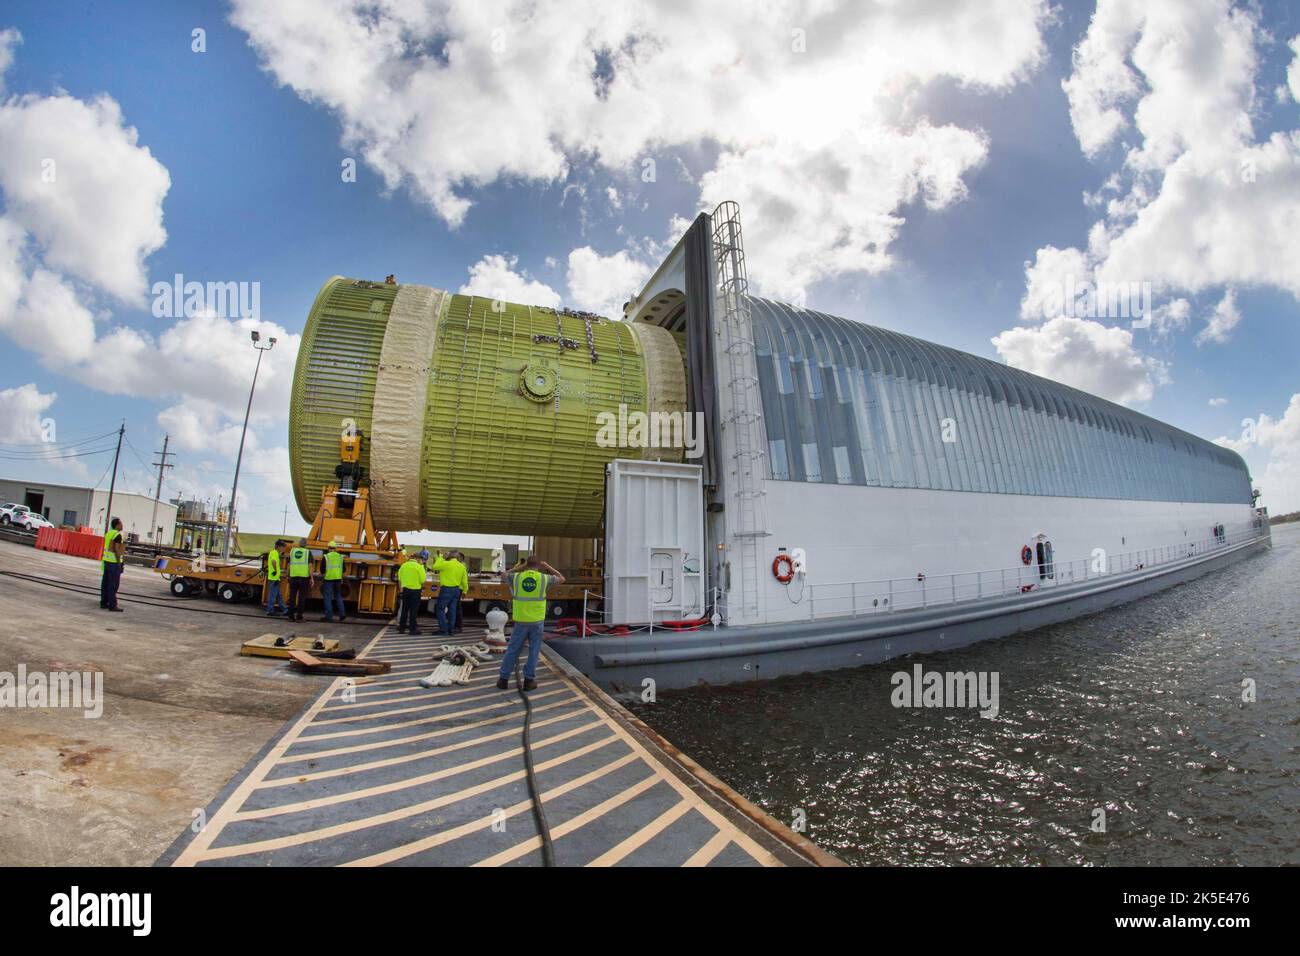 A structural test version of the intertank for NASA's new heavy-lift rocket, the Space Launch System (SLS), is loaded onto the 310-ft Pegasus barge, 22 February 2018, at NASA's Michoud Assembly Facility in New Orleans. The intertank is the second piece of structural hardware for the rocket's massive core stage scheduled for delivery to NASA's Marshall Space Flight Center in Huntsville, Alabama, for testing will stress-test the intertank with millions of pounds of force to simulate the forces of launch and ascent. An optimised version of an original NASA image. Credit: NASA Stock Photo